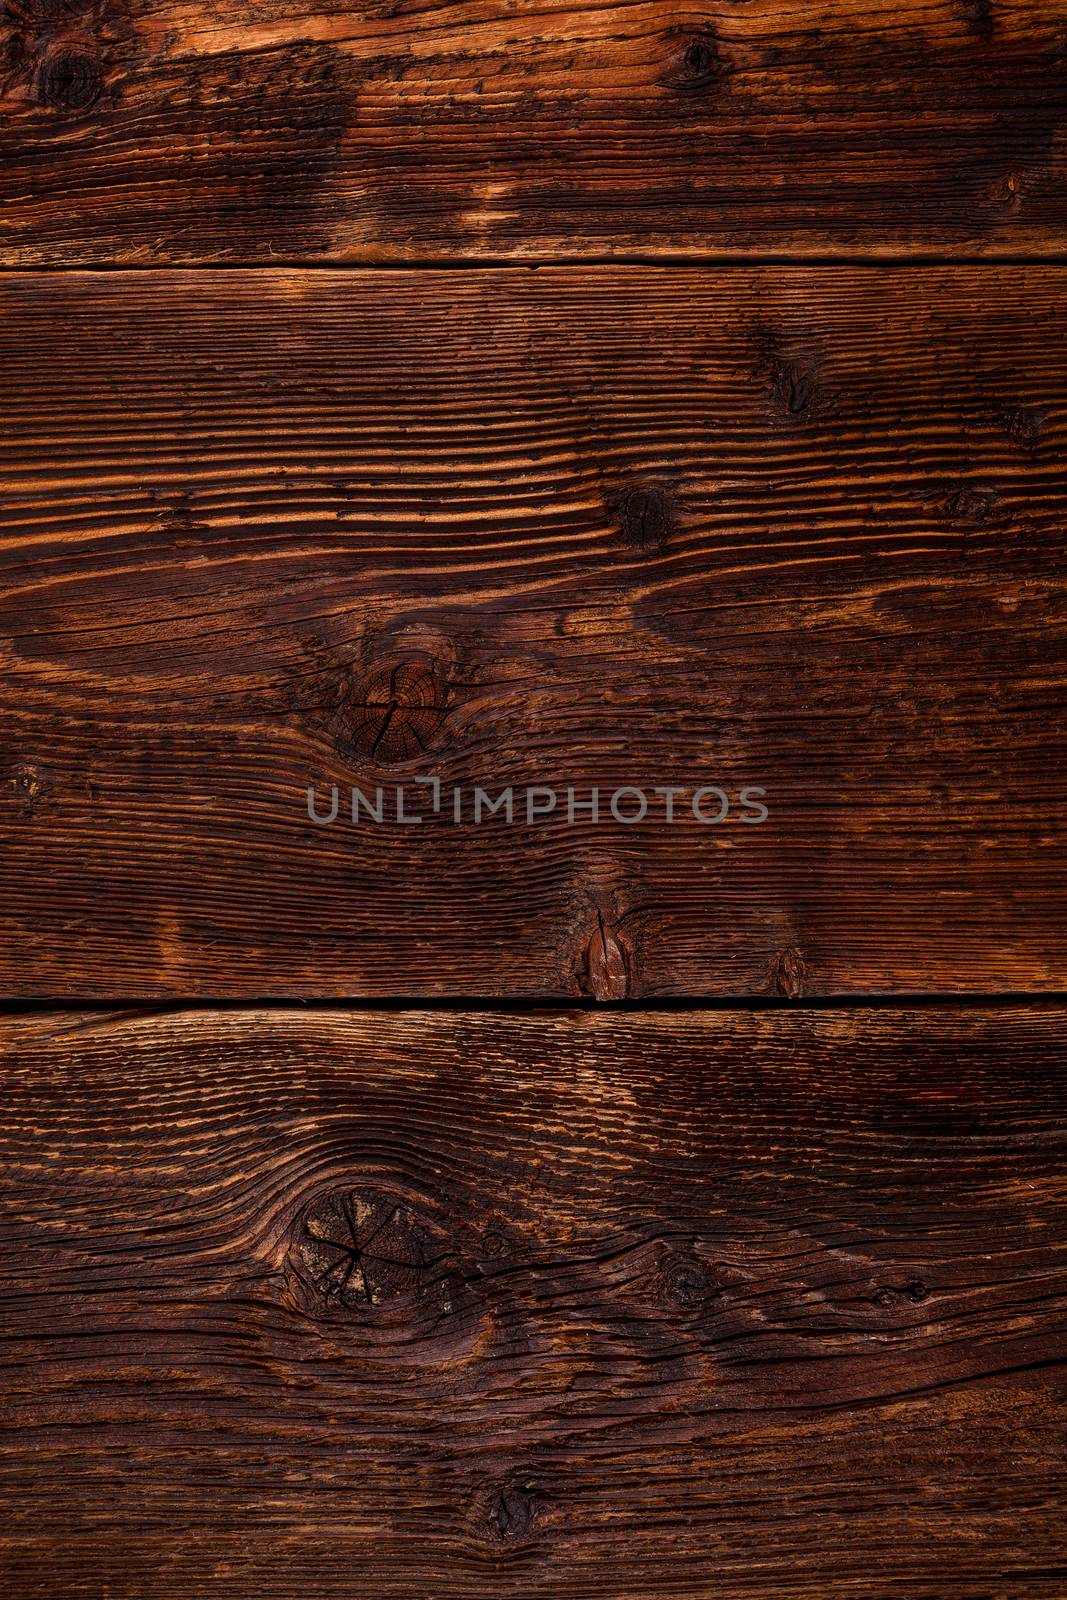 Natural sun aged wooden textured background.